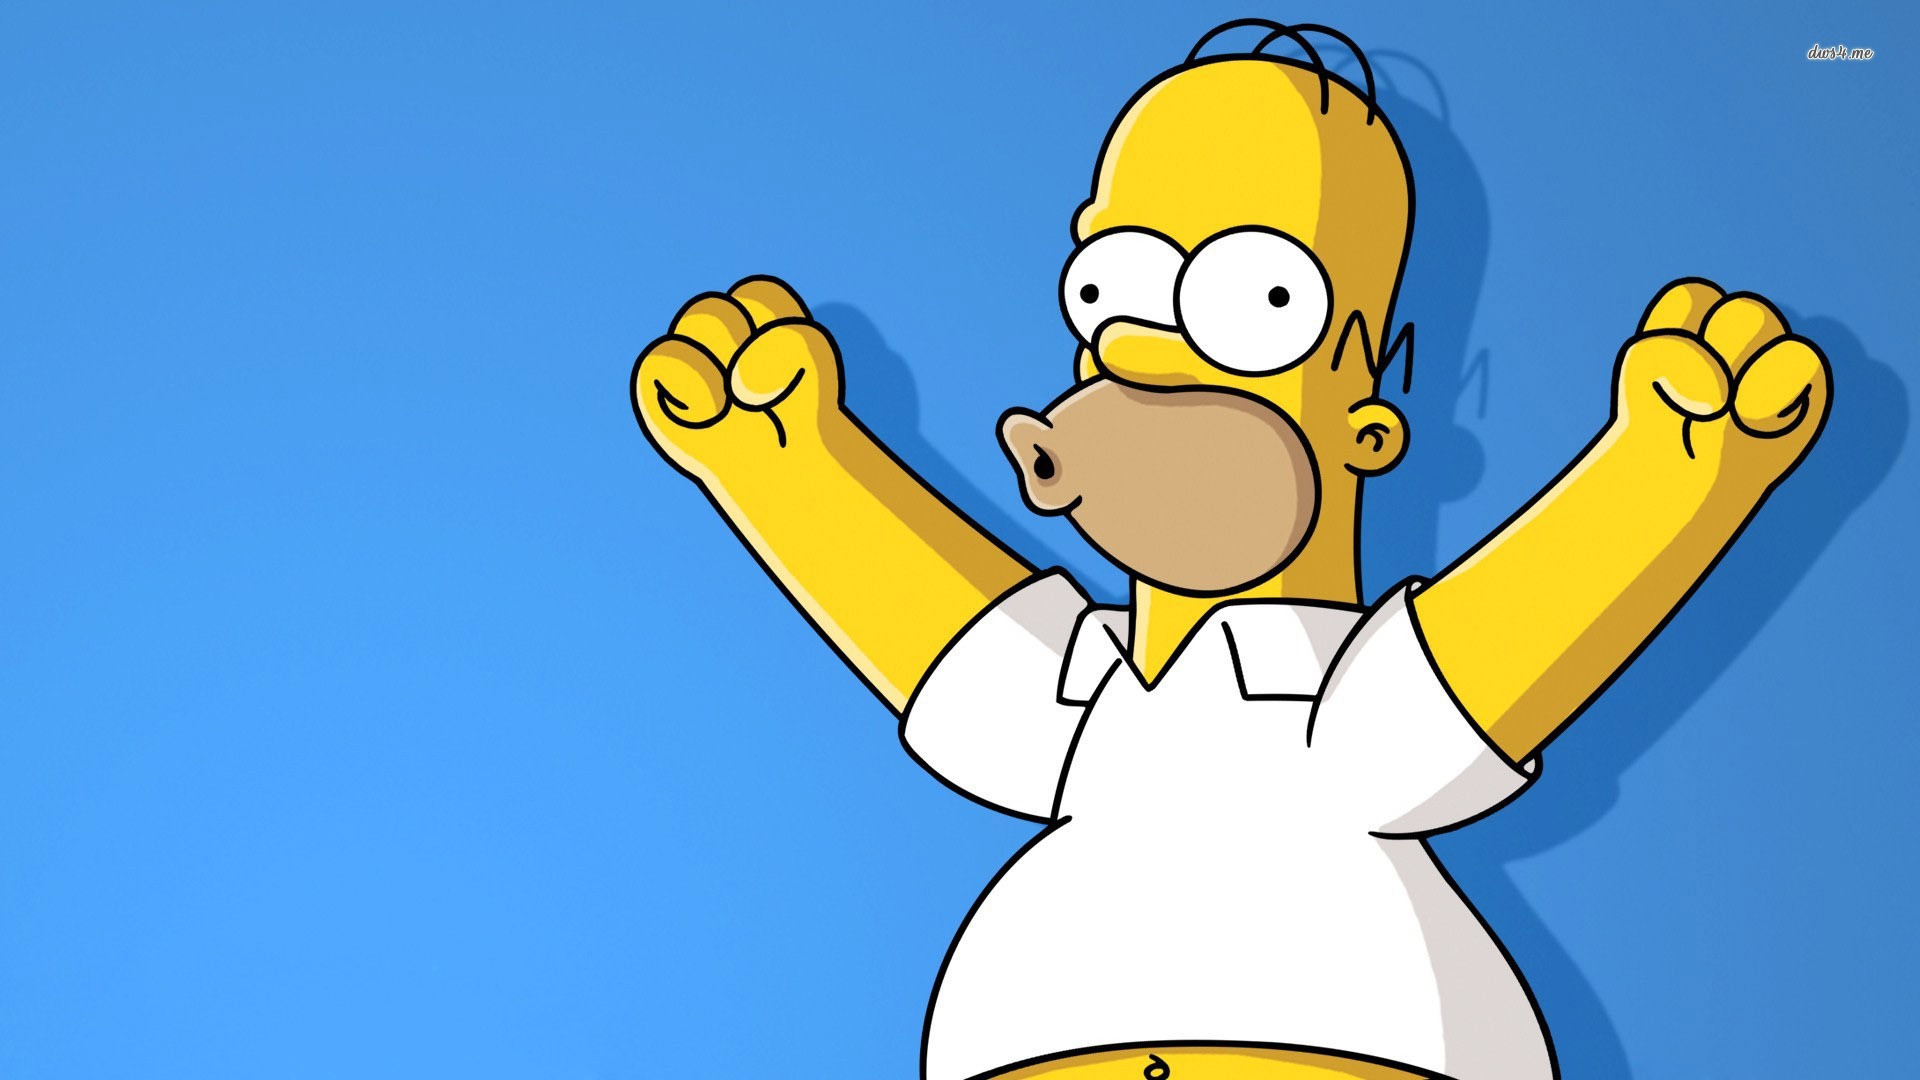 Simpsons wallpaper ·① Download free awesome High ...